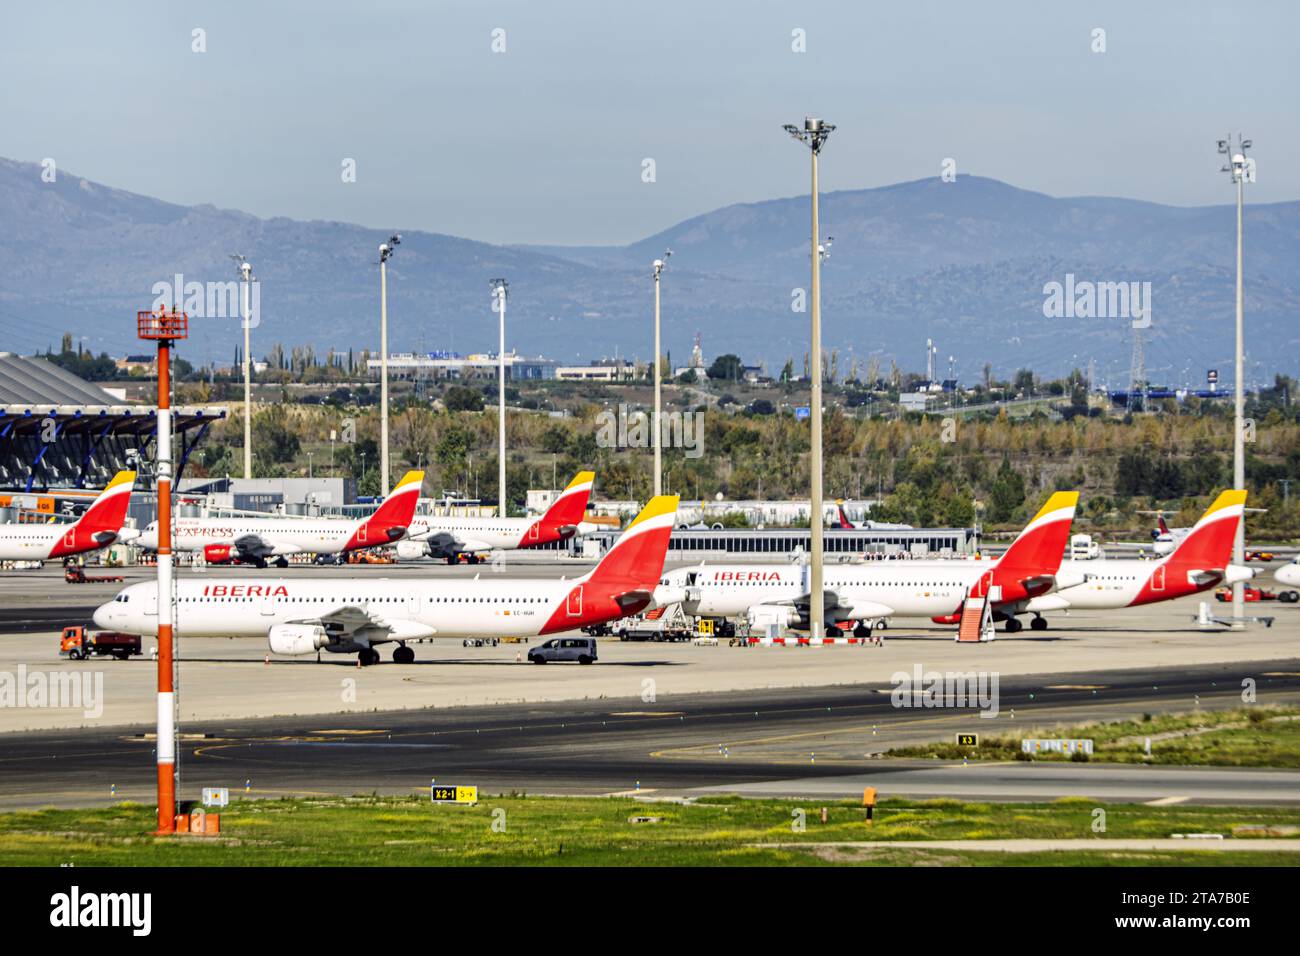 Planes on the runway of Madrid Barajas airport Stock Photo